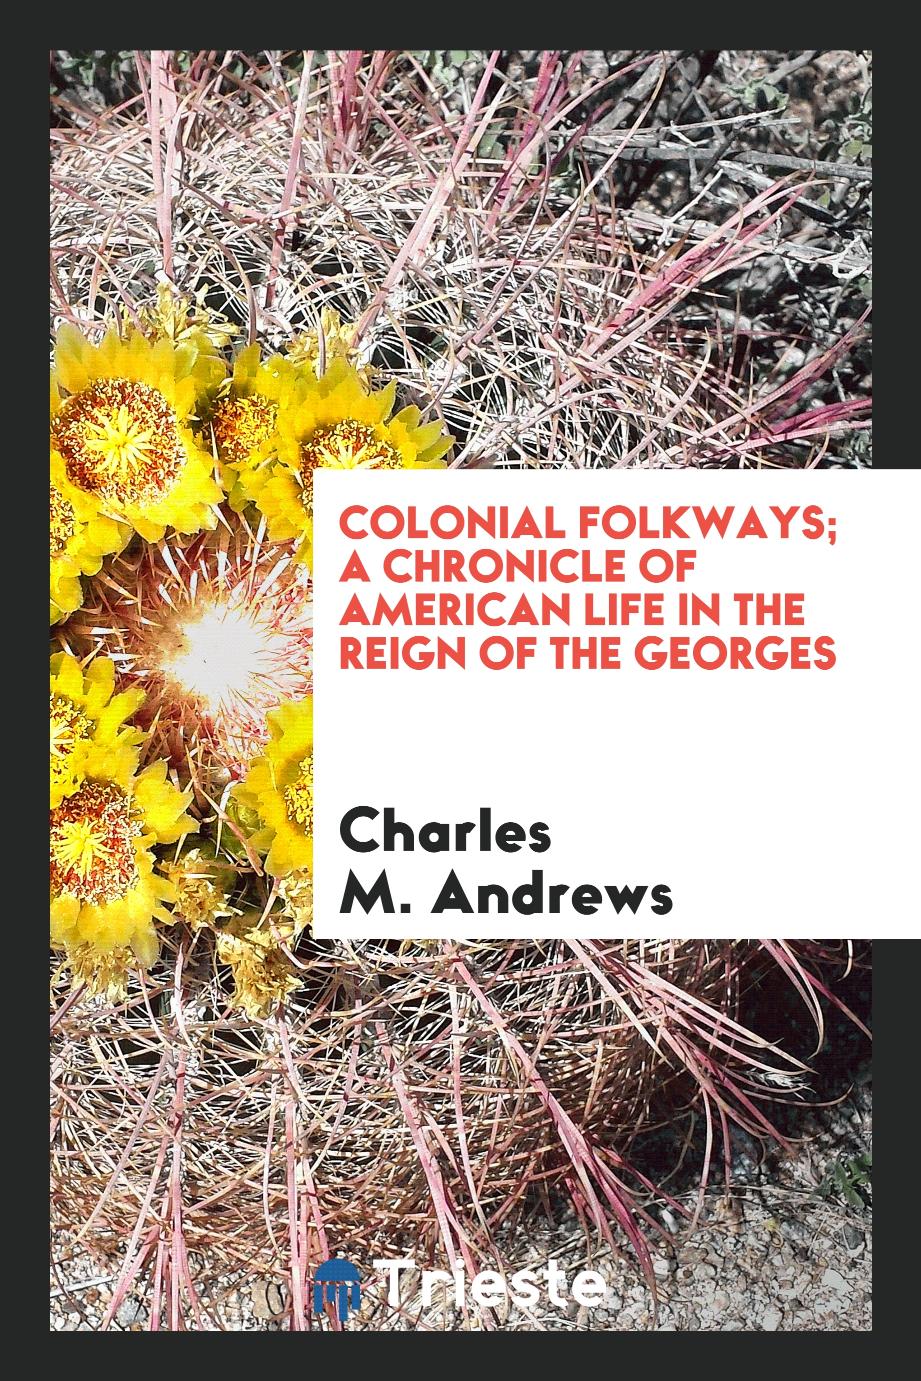 Colonial folkways; a chronicle of American life in the reign of the Georges